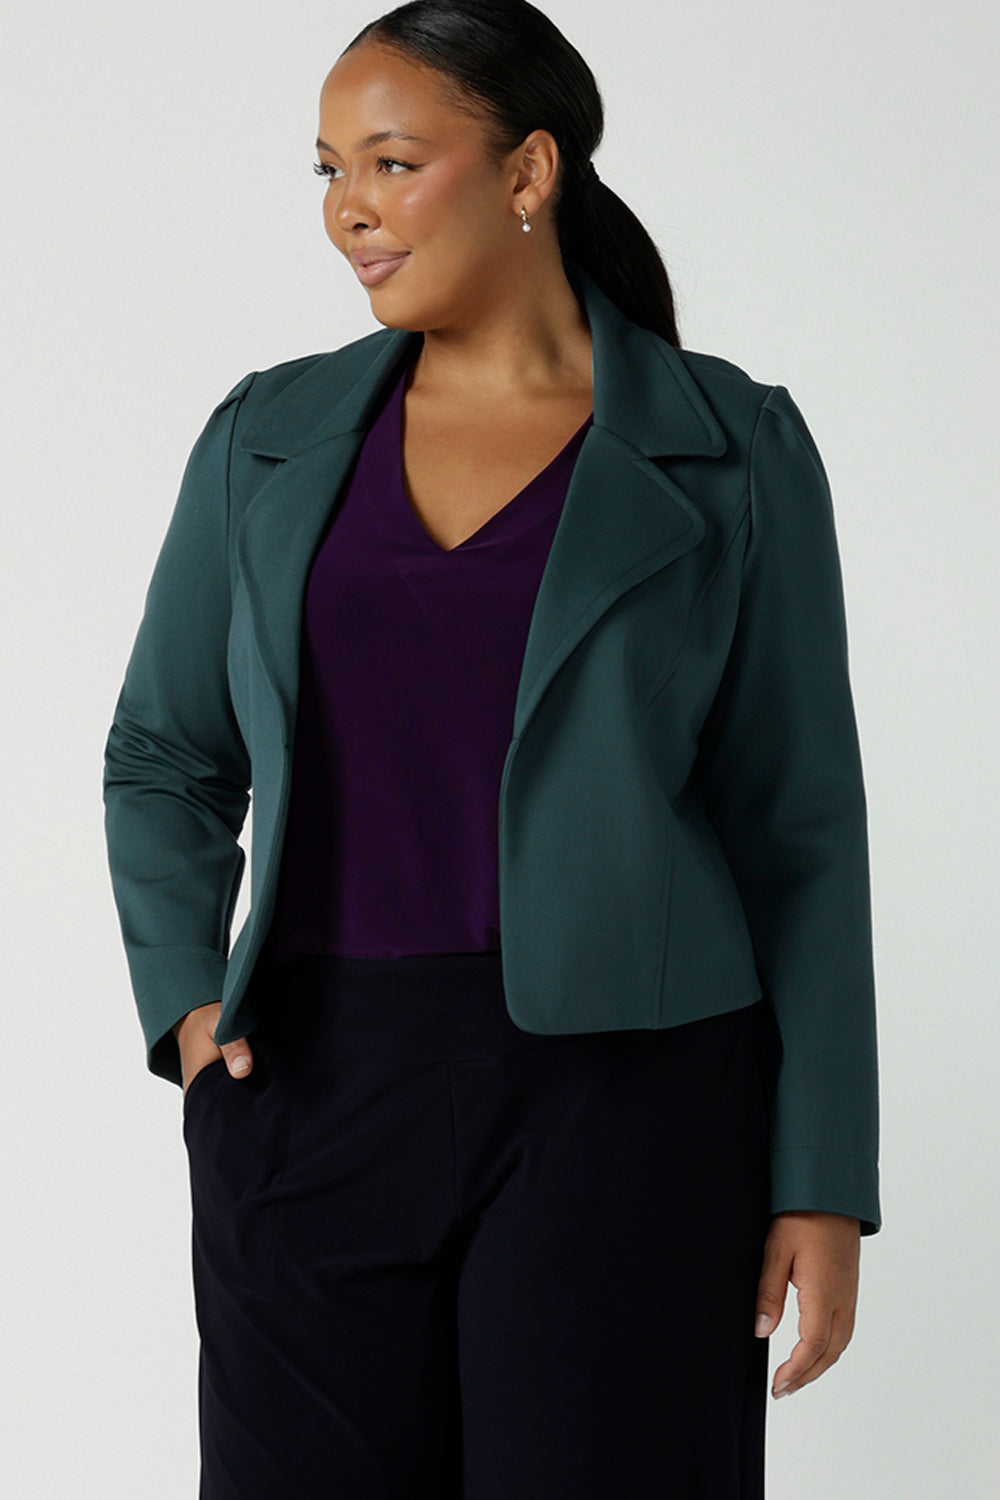 Size 10 woman wears the Garcia Jacket in Alpine styled back with the Vida Top in Amethyst. A v-neckline style with 3/4 sleeves. Styled back with Monroe in Navy. A comfortable corporate work pant. Size 8 - 24.